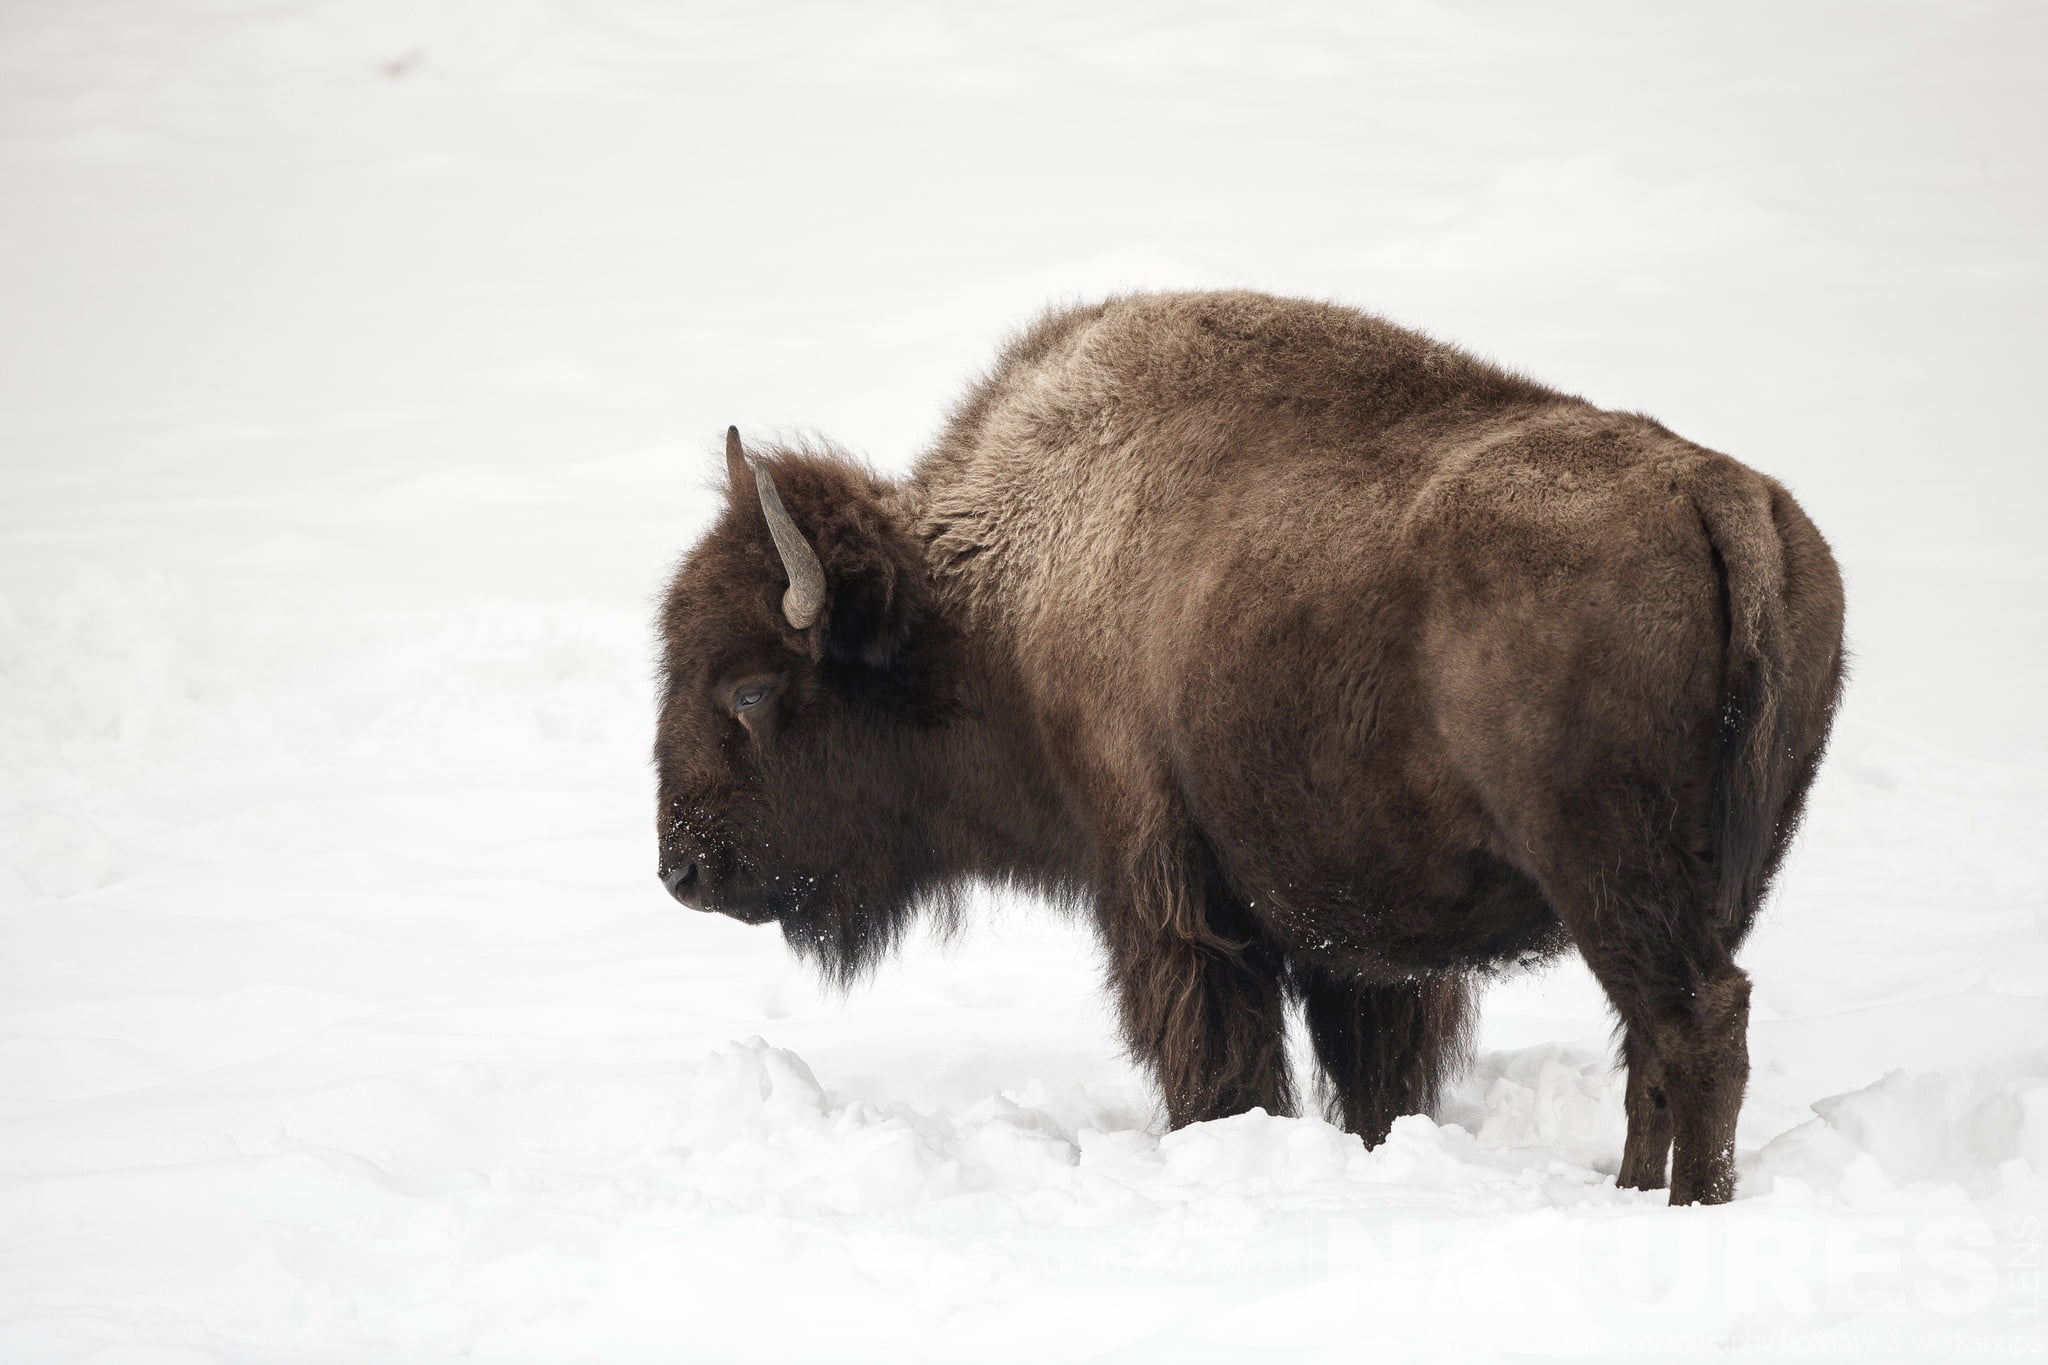 One Of Yellowstone'S Bison Standing In The Snow Typical Of That Which You Will Have Opportunities To Capture During The Yellowstone Wildlife In Winter Photography Holiday